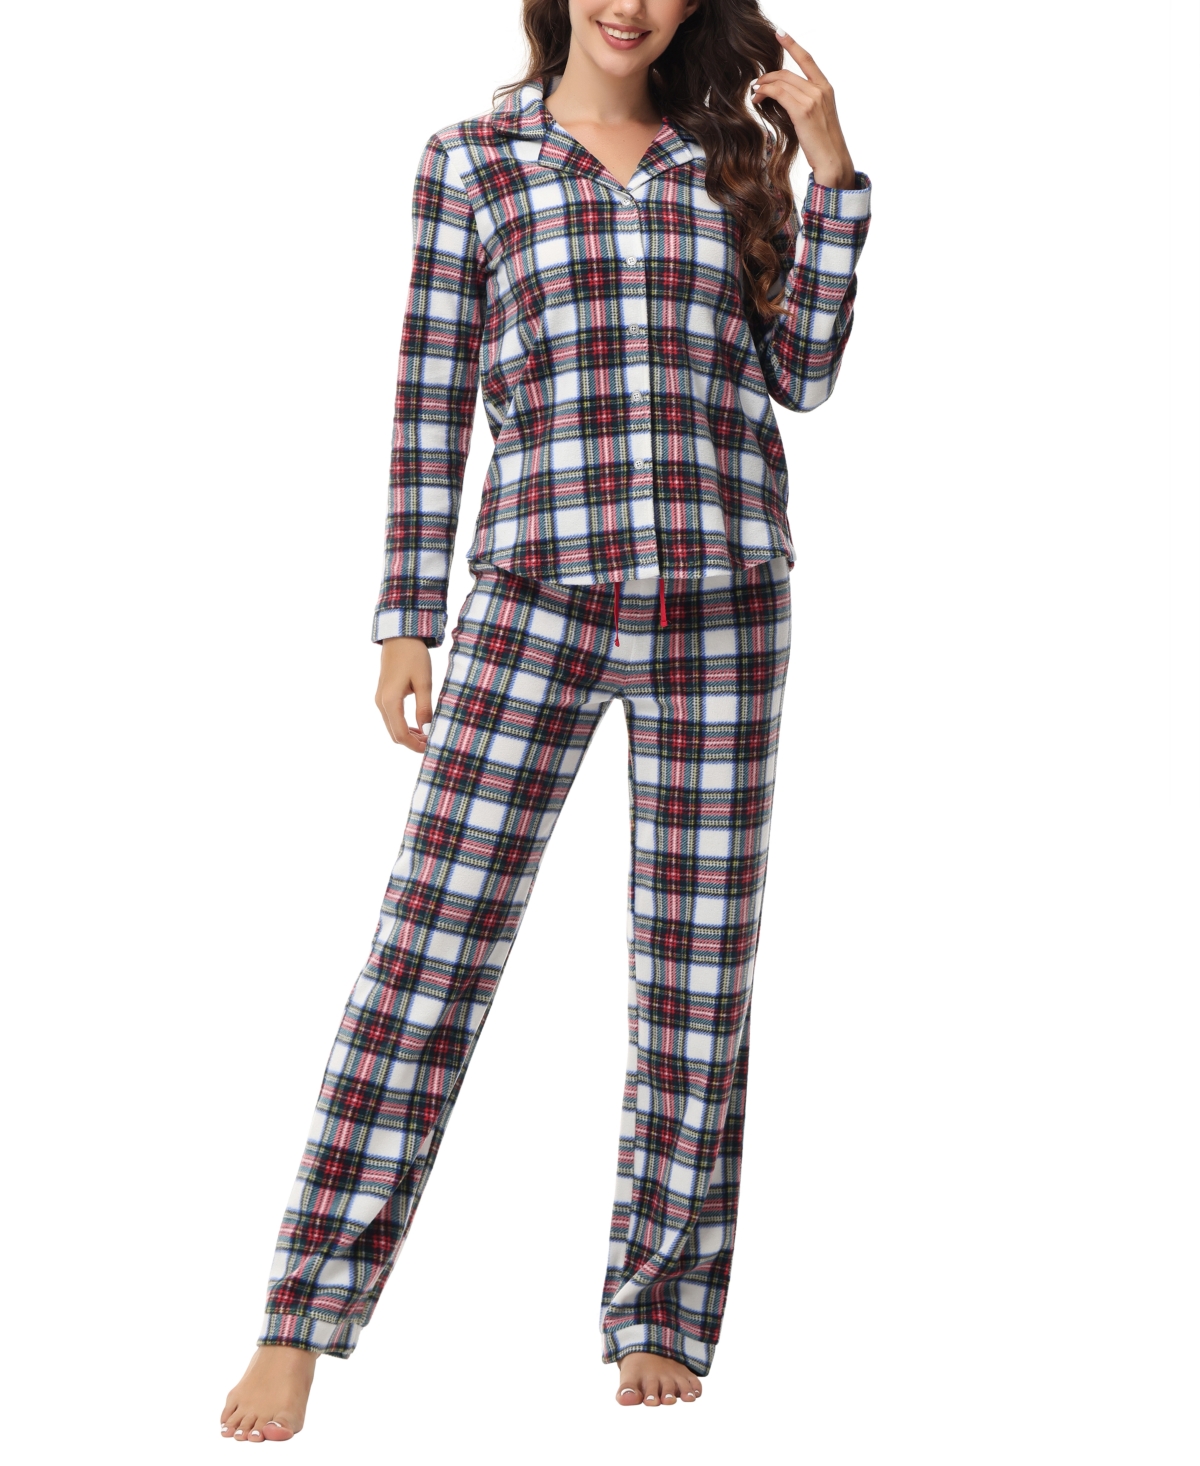 Women's Long Sleeve Notch Collar Top with Lounge Pants 2 Piece Pajama Set - Candy Canes